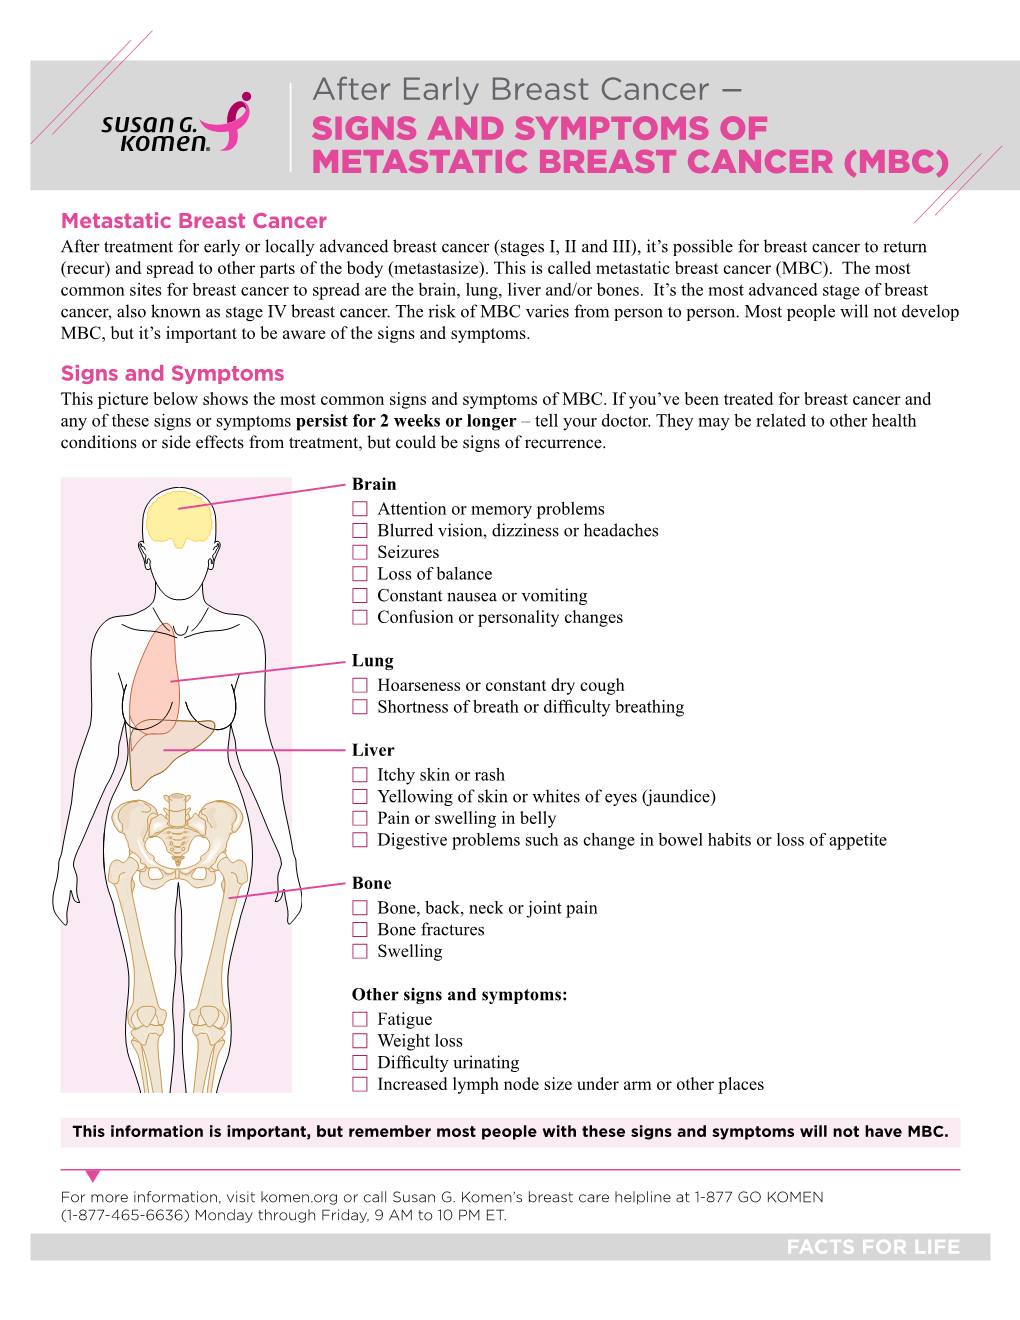 Signs and Symptoms of Metastatic Breast Cancer (Mbc)